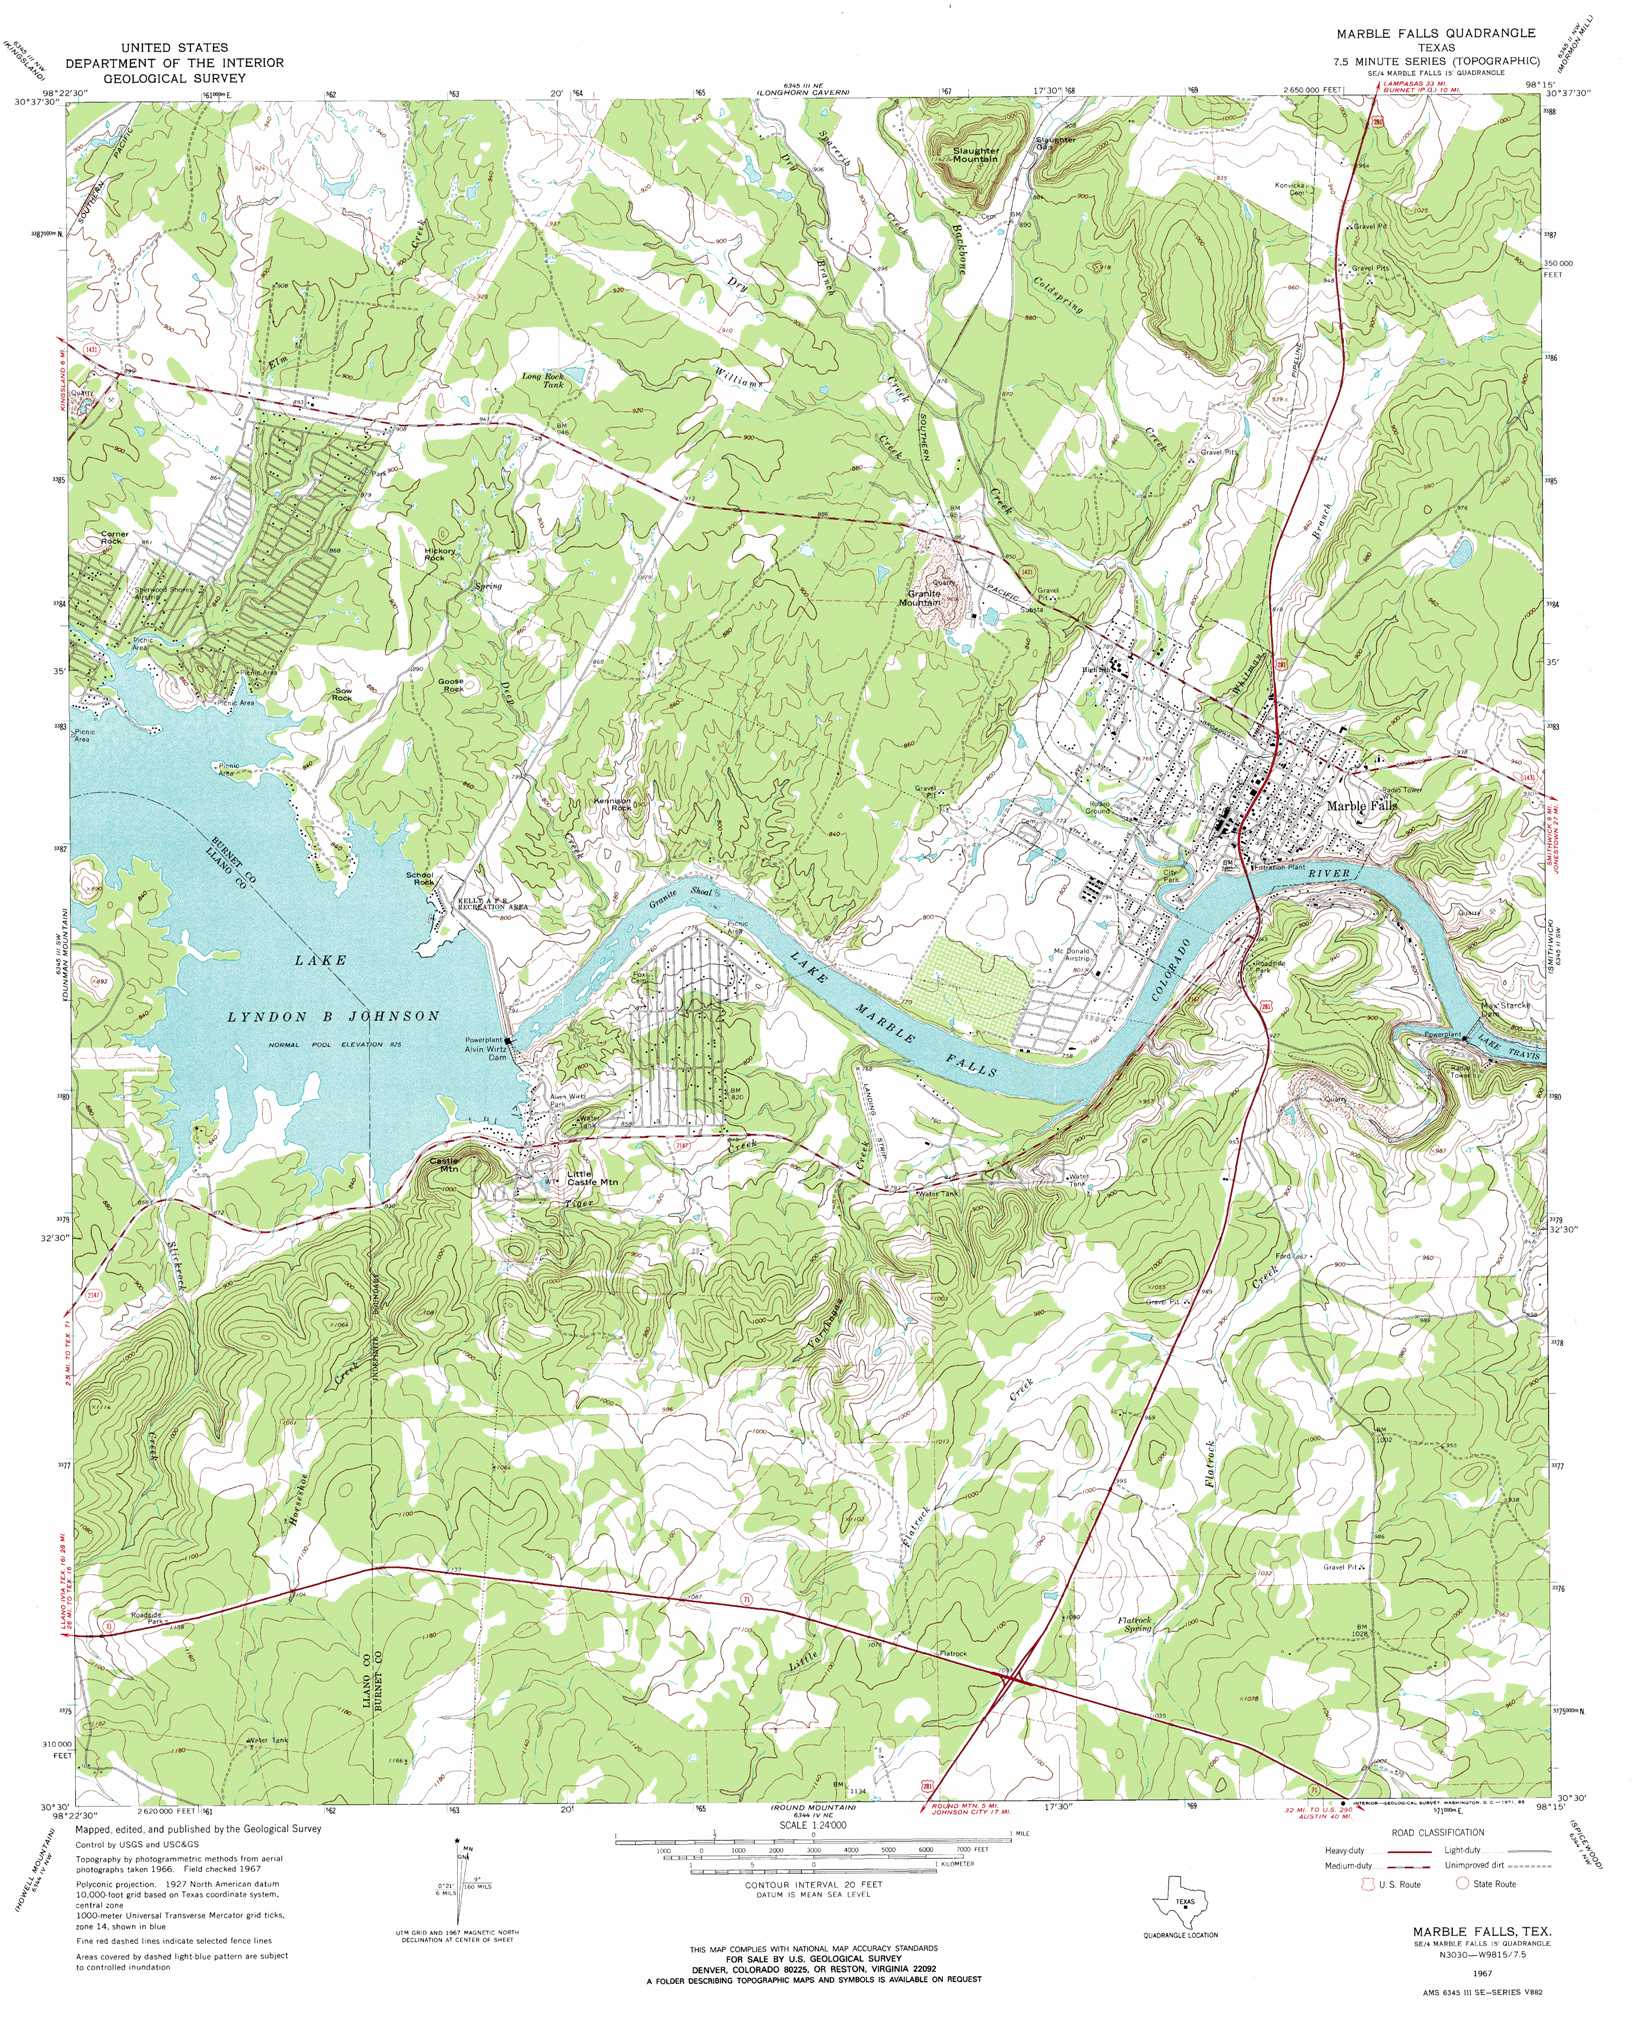 Marble Falls topographic map 124,000 scale, Texas